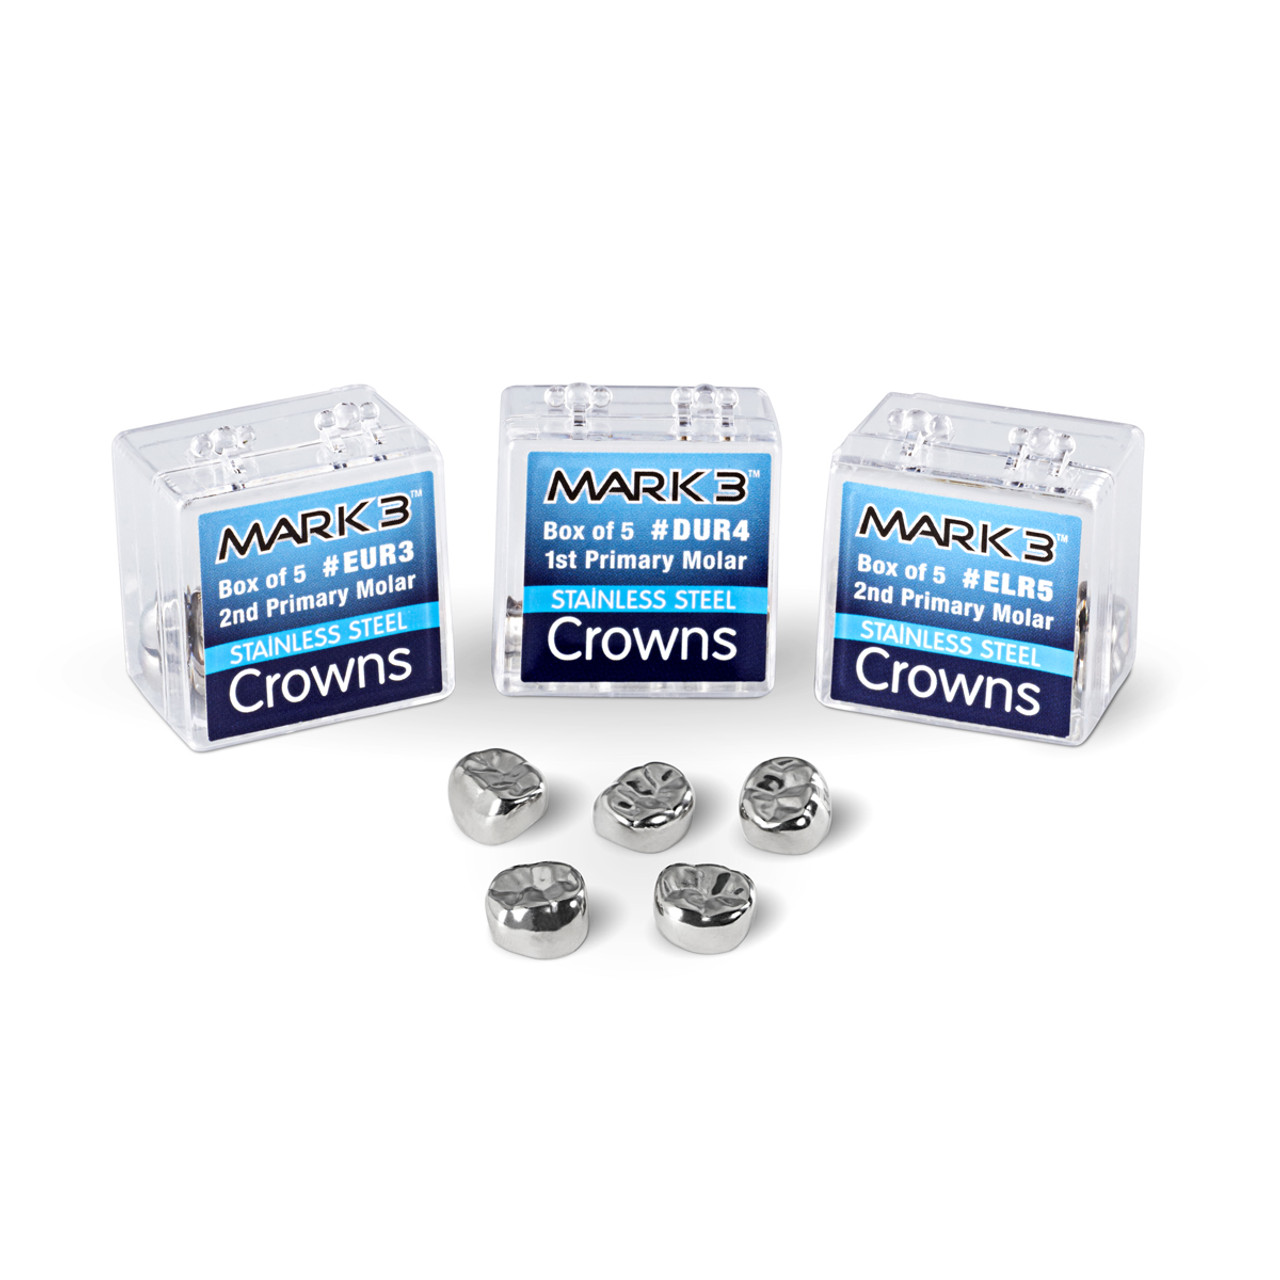 Stainless Steel Crowns 2nd Primary Molar E-LL-6 5/bx. - MARK3